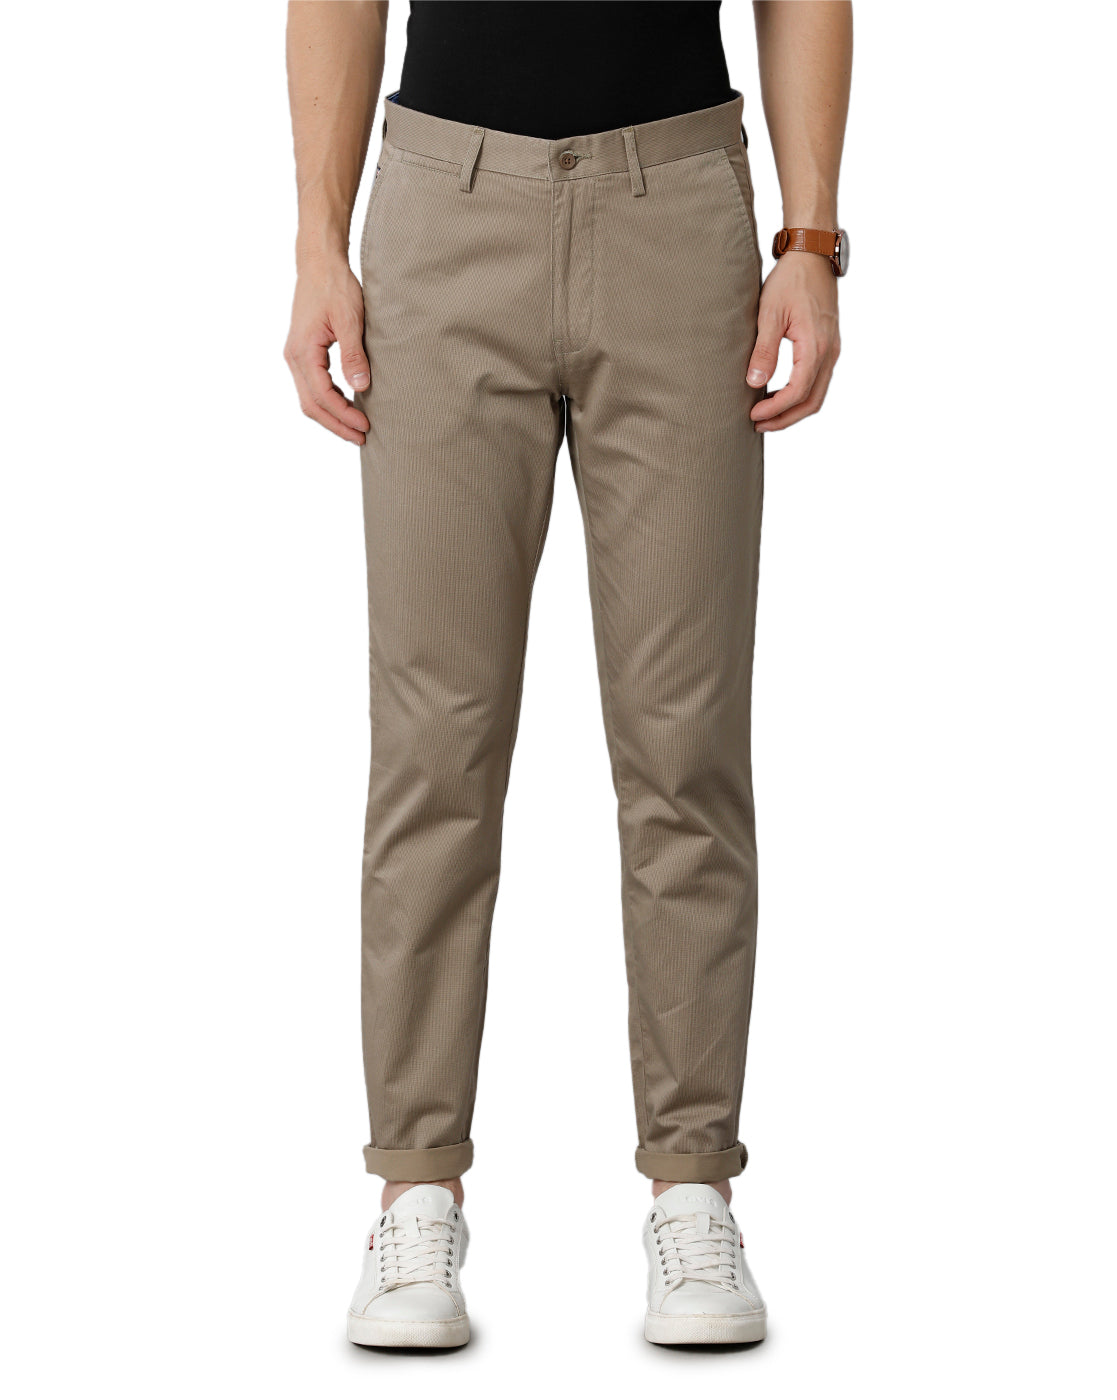 Dark Sand Solid Casual Cotton Trouser - Double Two